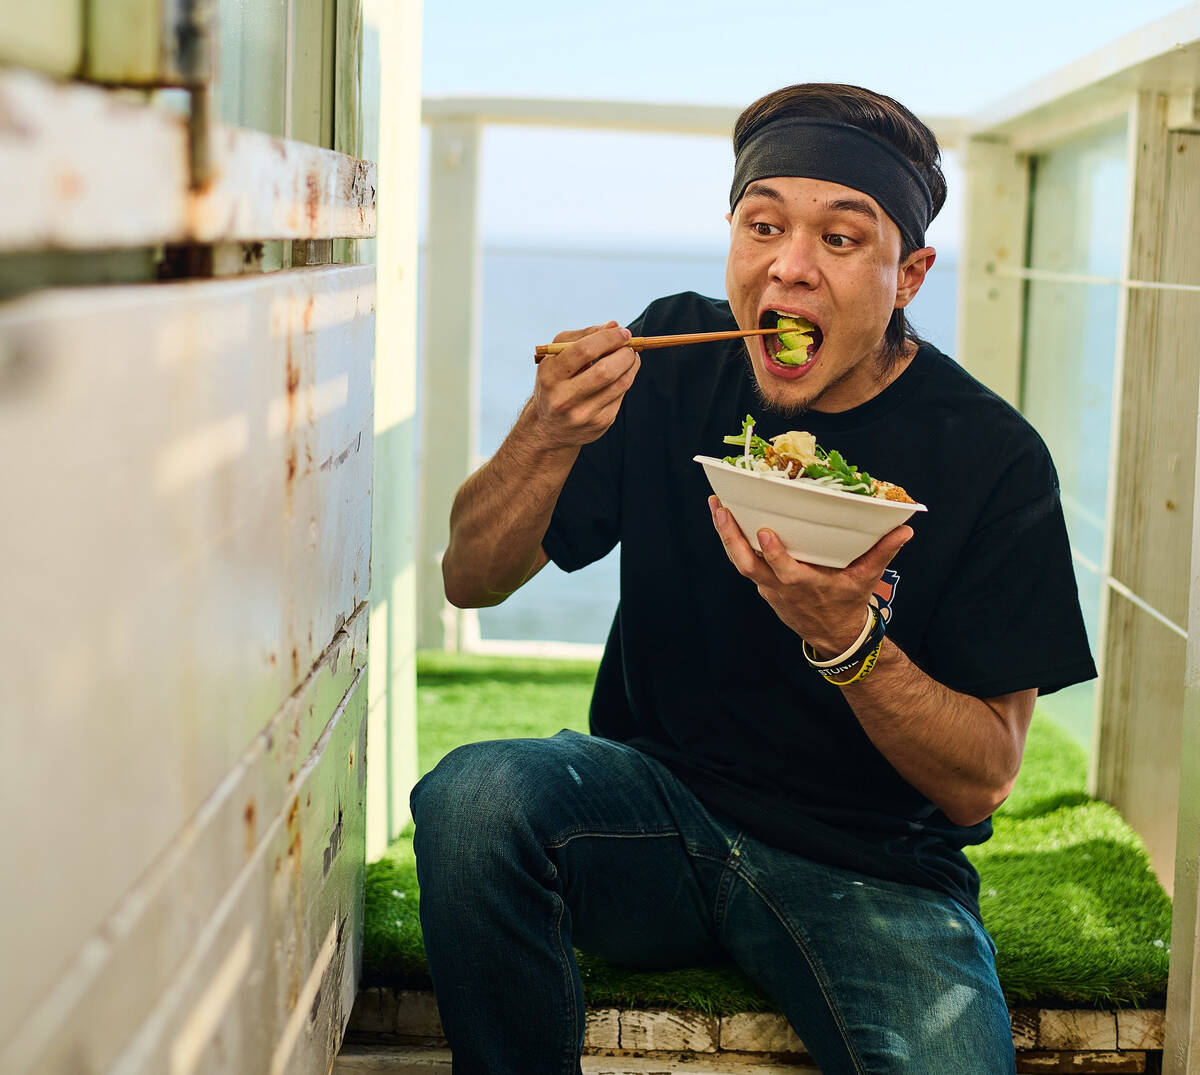 Stonie Bowls from Matt Stonie, the competitive eater and YouTube star, recently became availabl ...